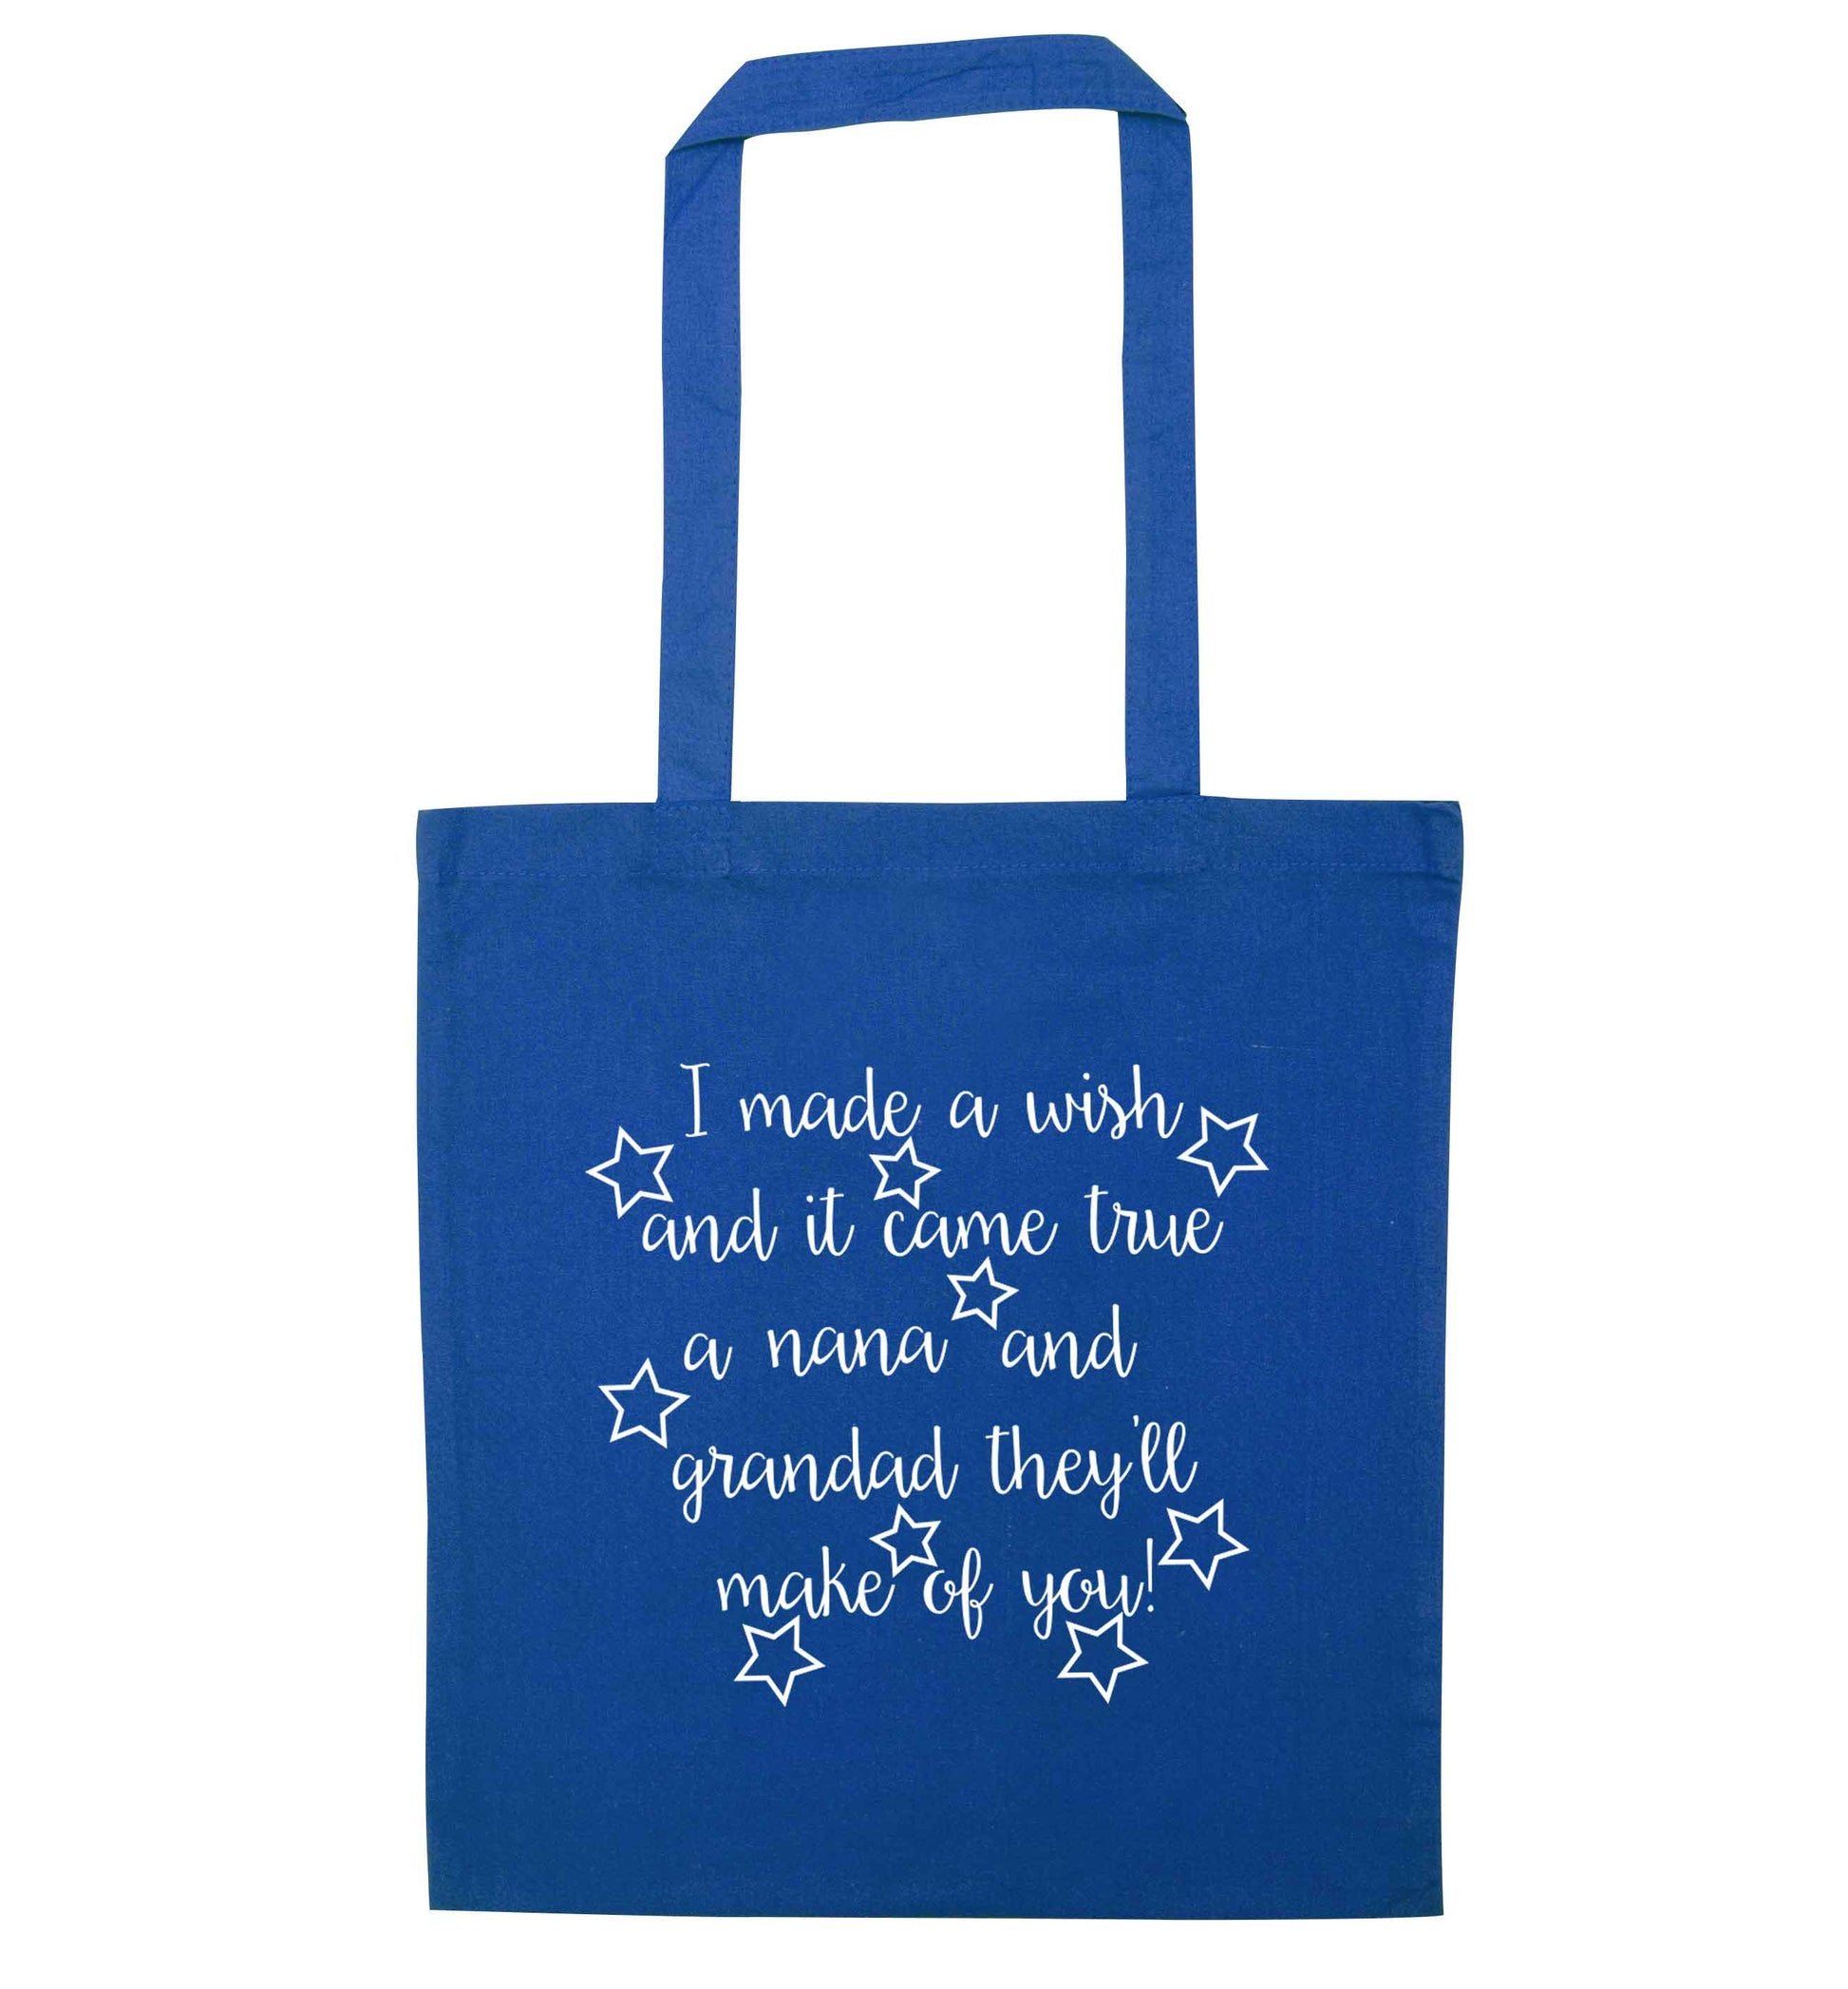 I made a wish and it came true a nana and grandad they'll make of you! blue tote bag